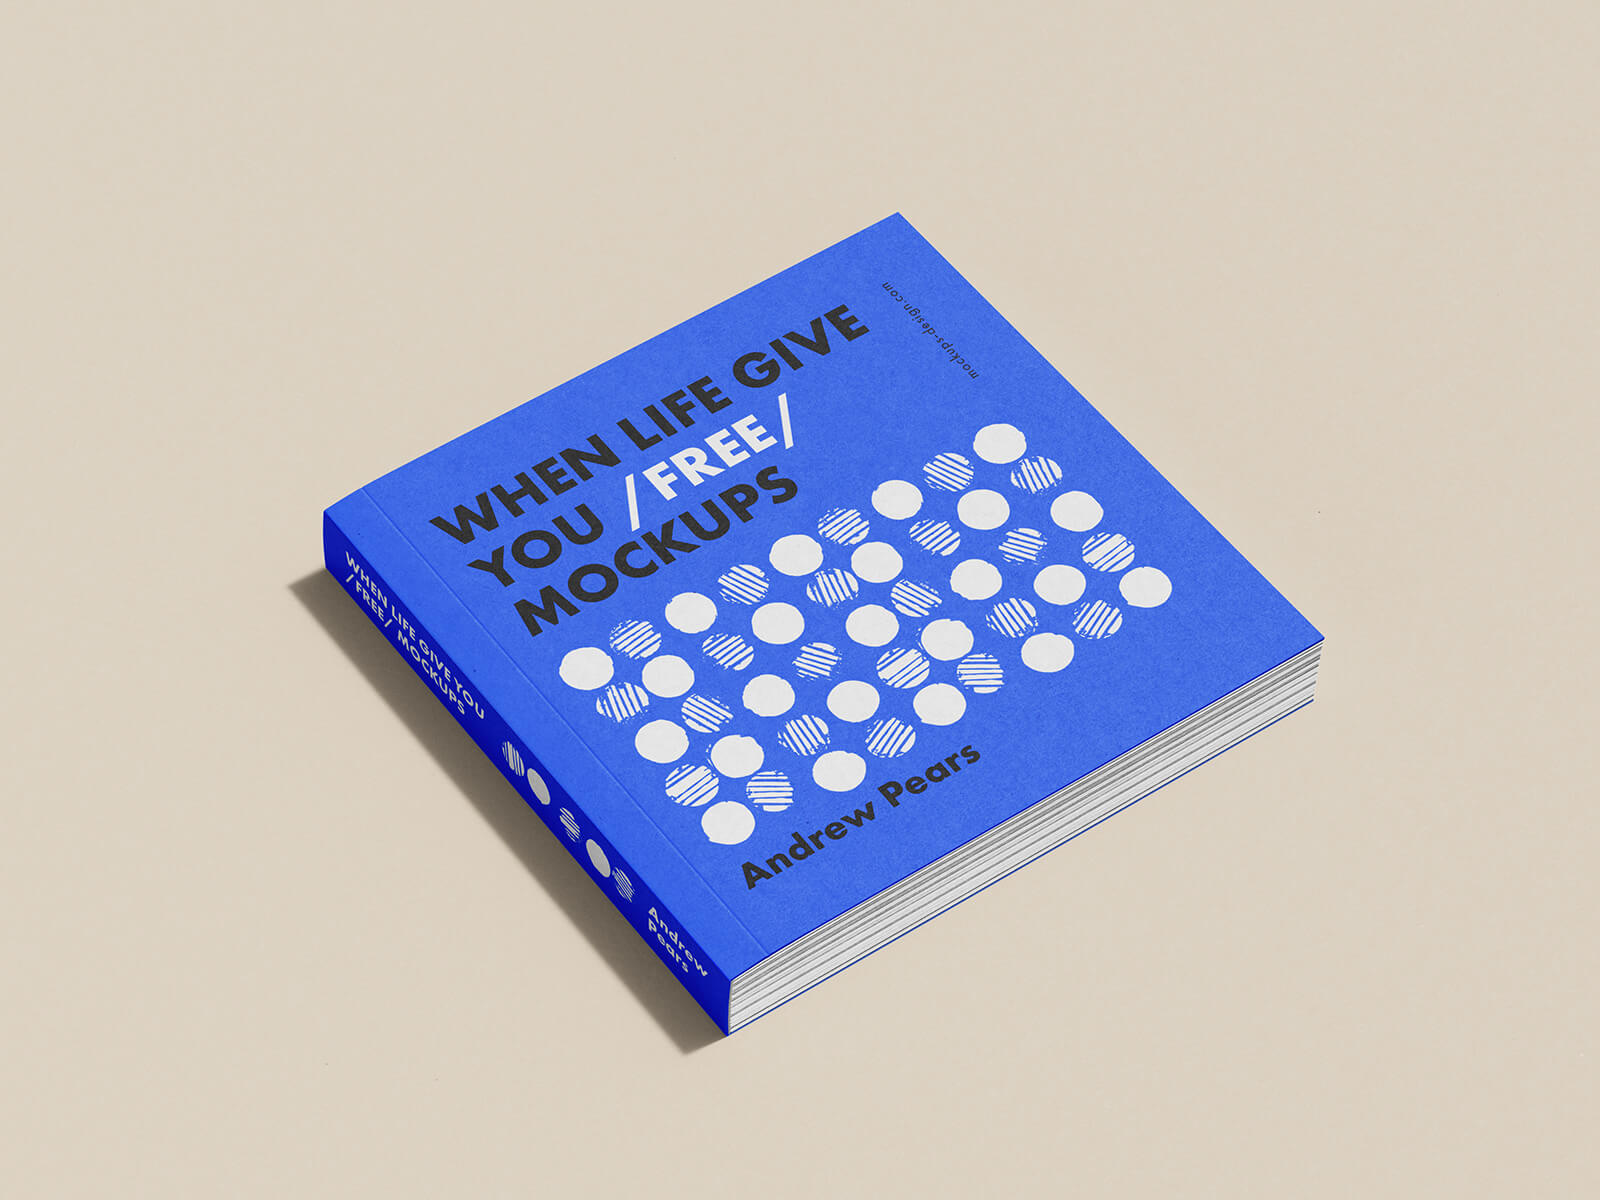 Free Softcover Square Book Mockup PSD